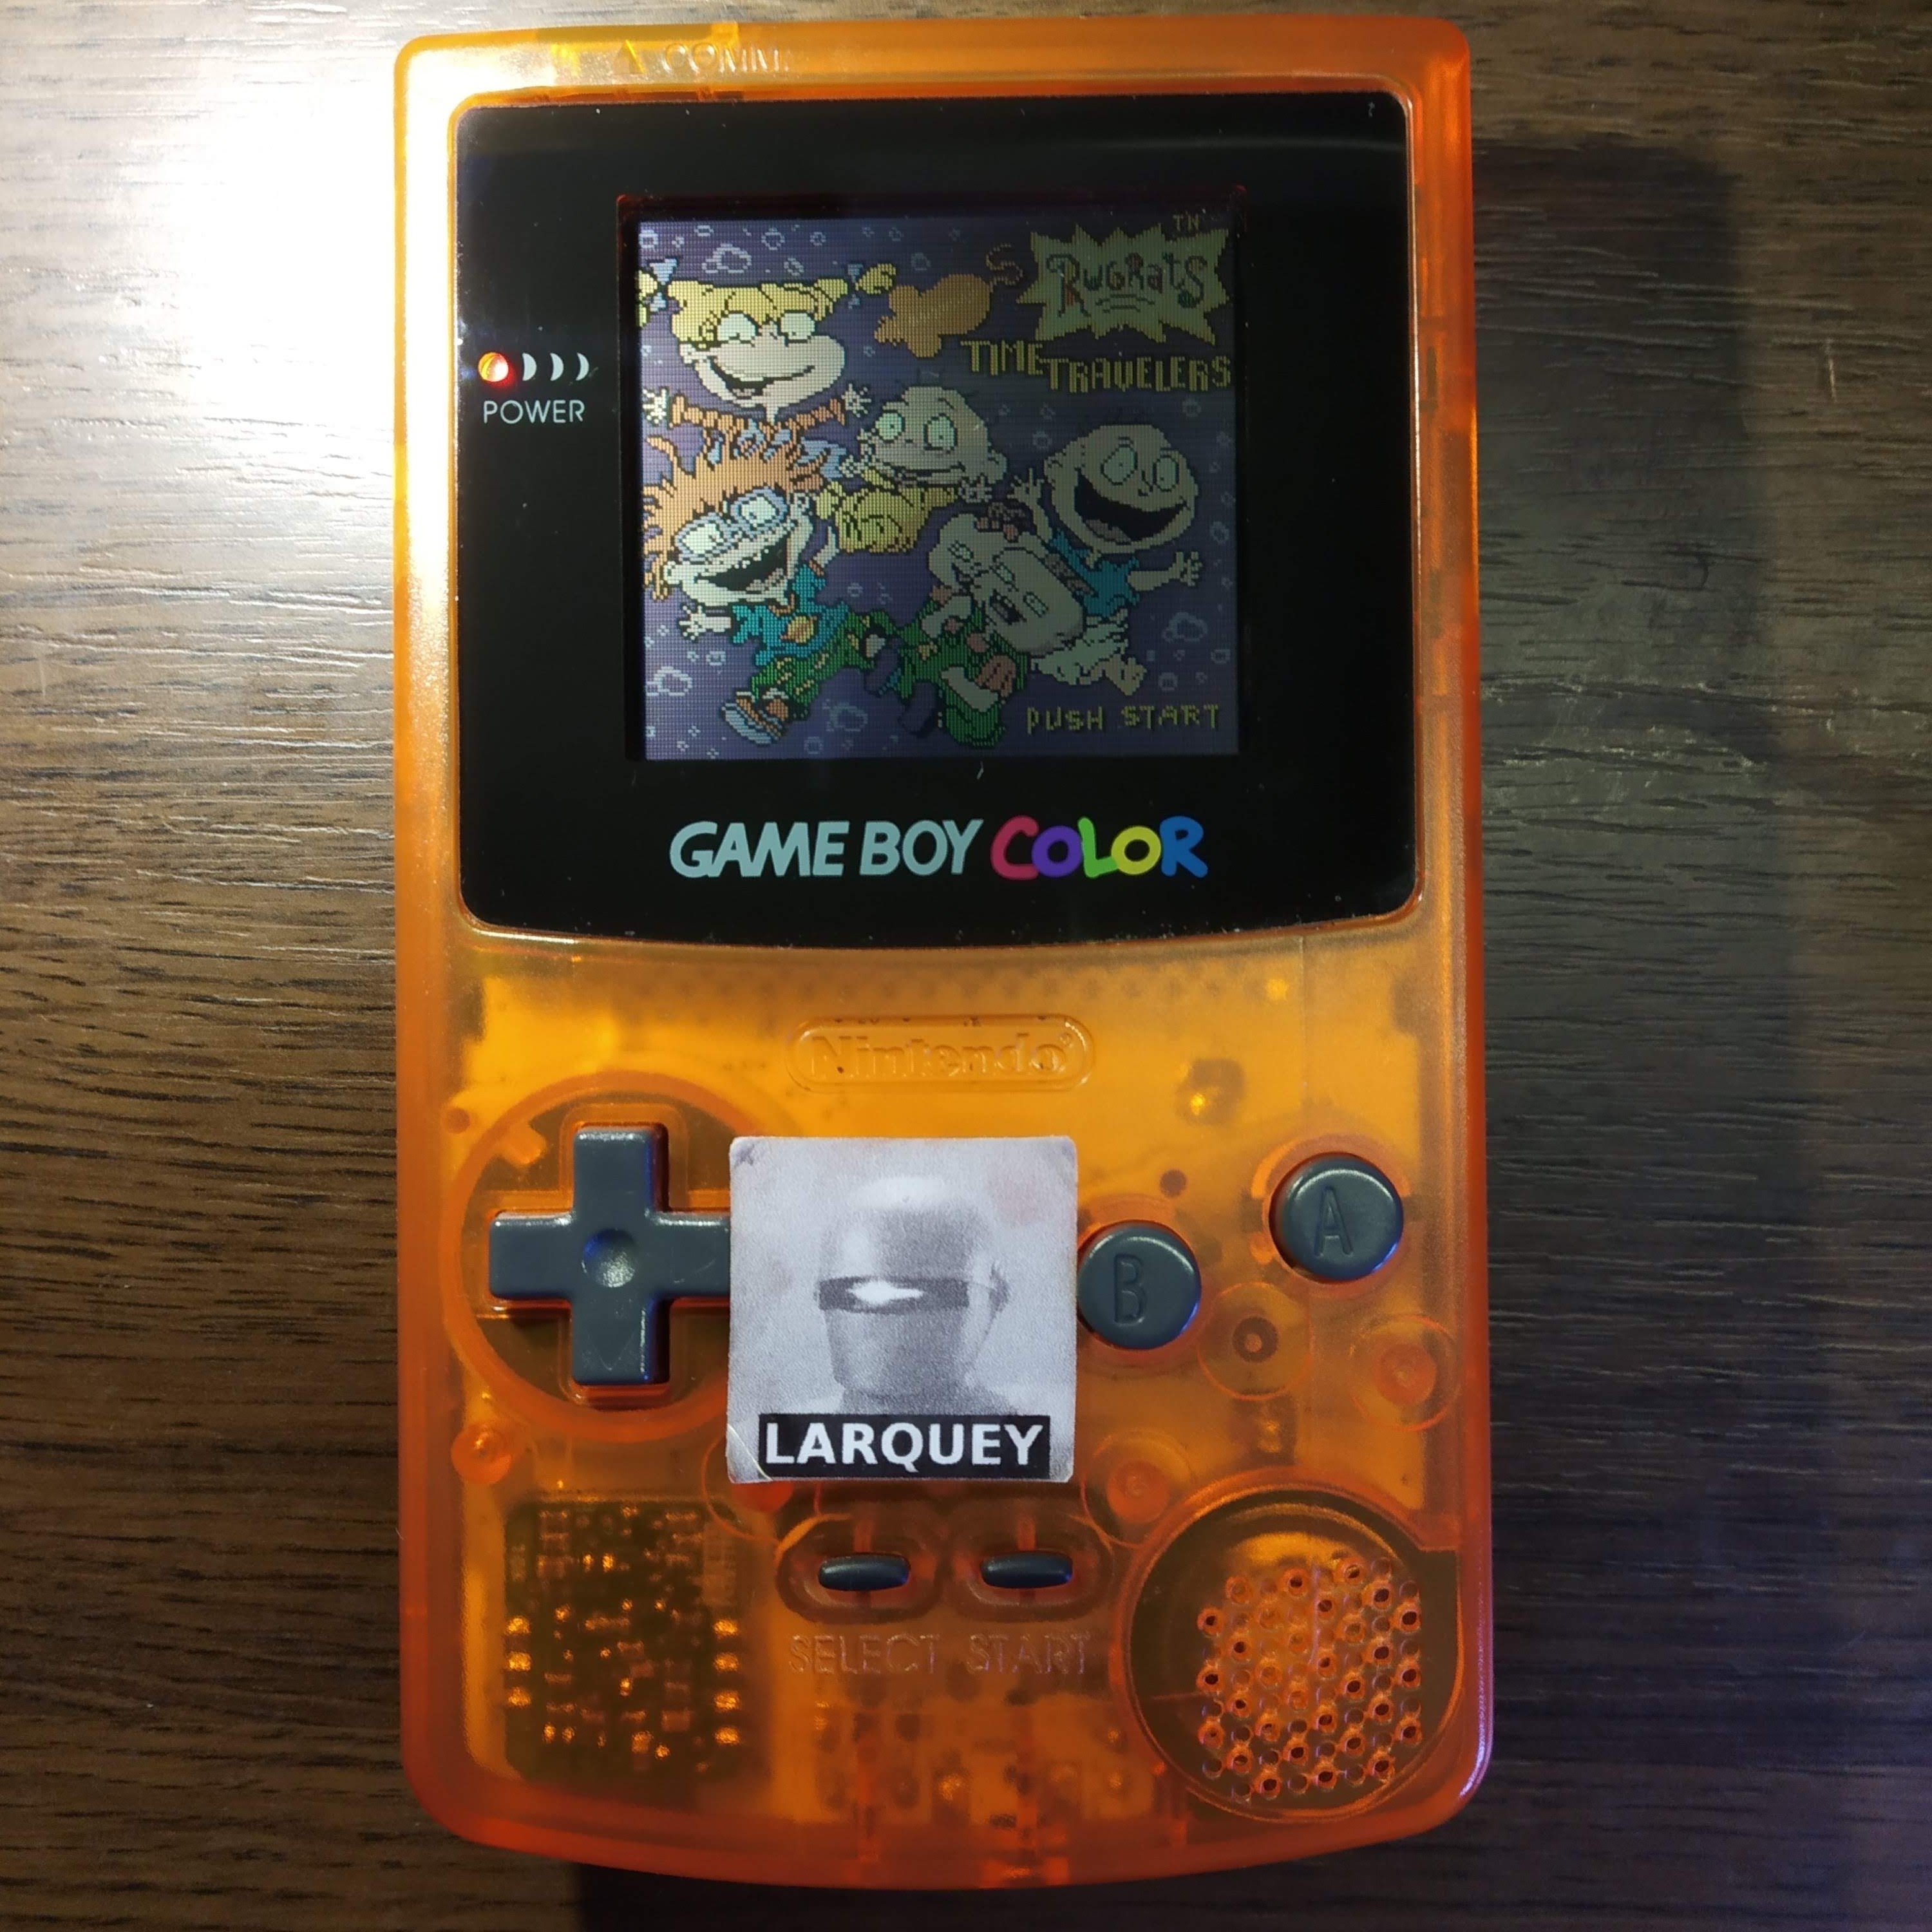 Larquey: Rugrats: Time Travelers (Game Boy Color) 15,400 points on 2020-07-24 04:36:20